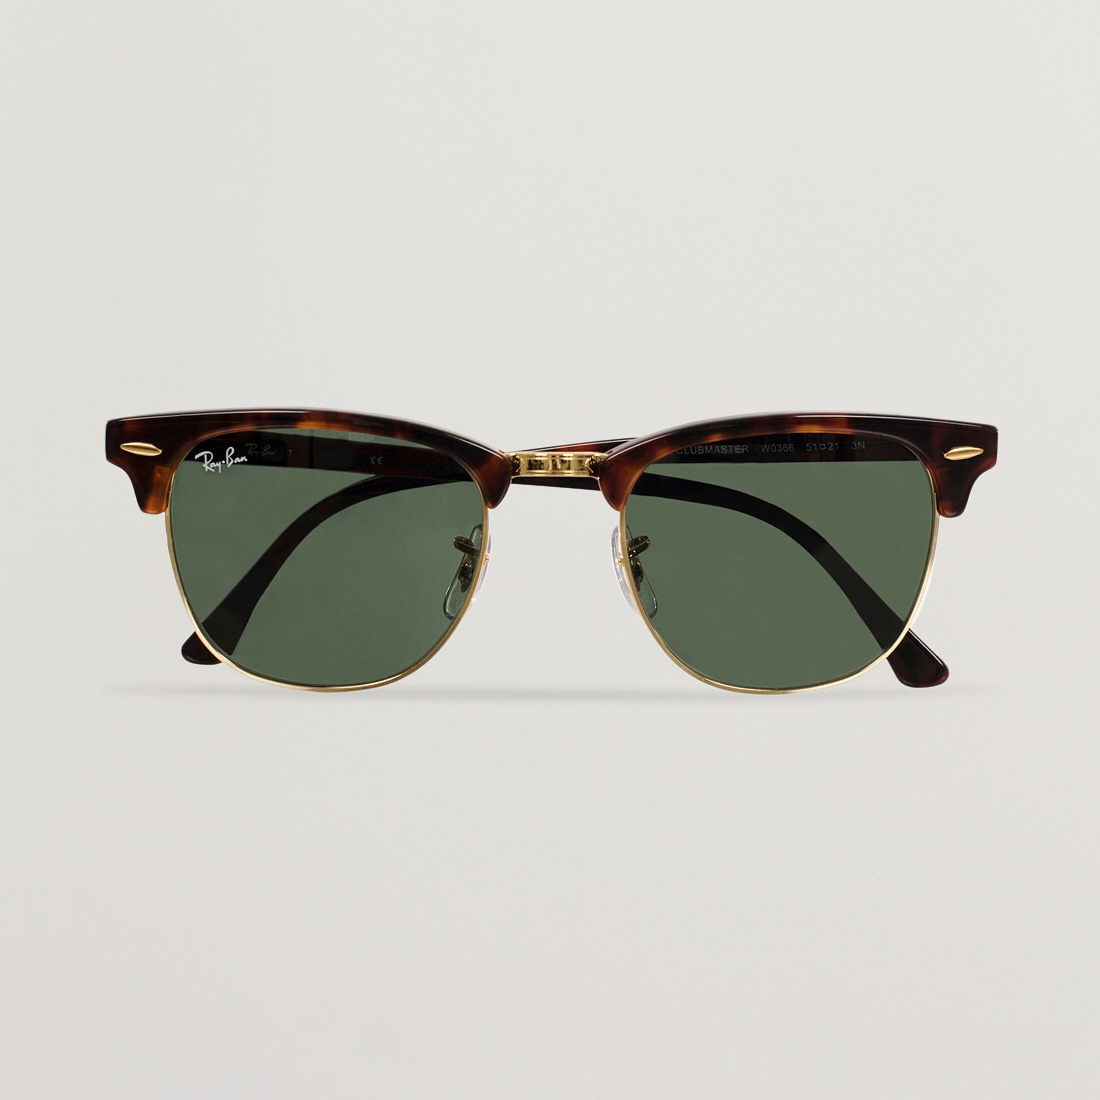 RayBan for BEAMS EXCLUSIVE CLUBMASTER